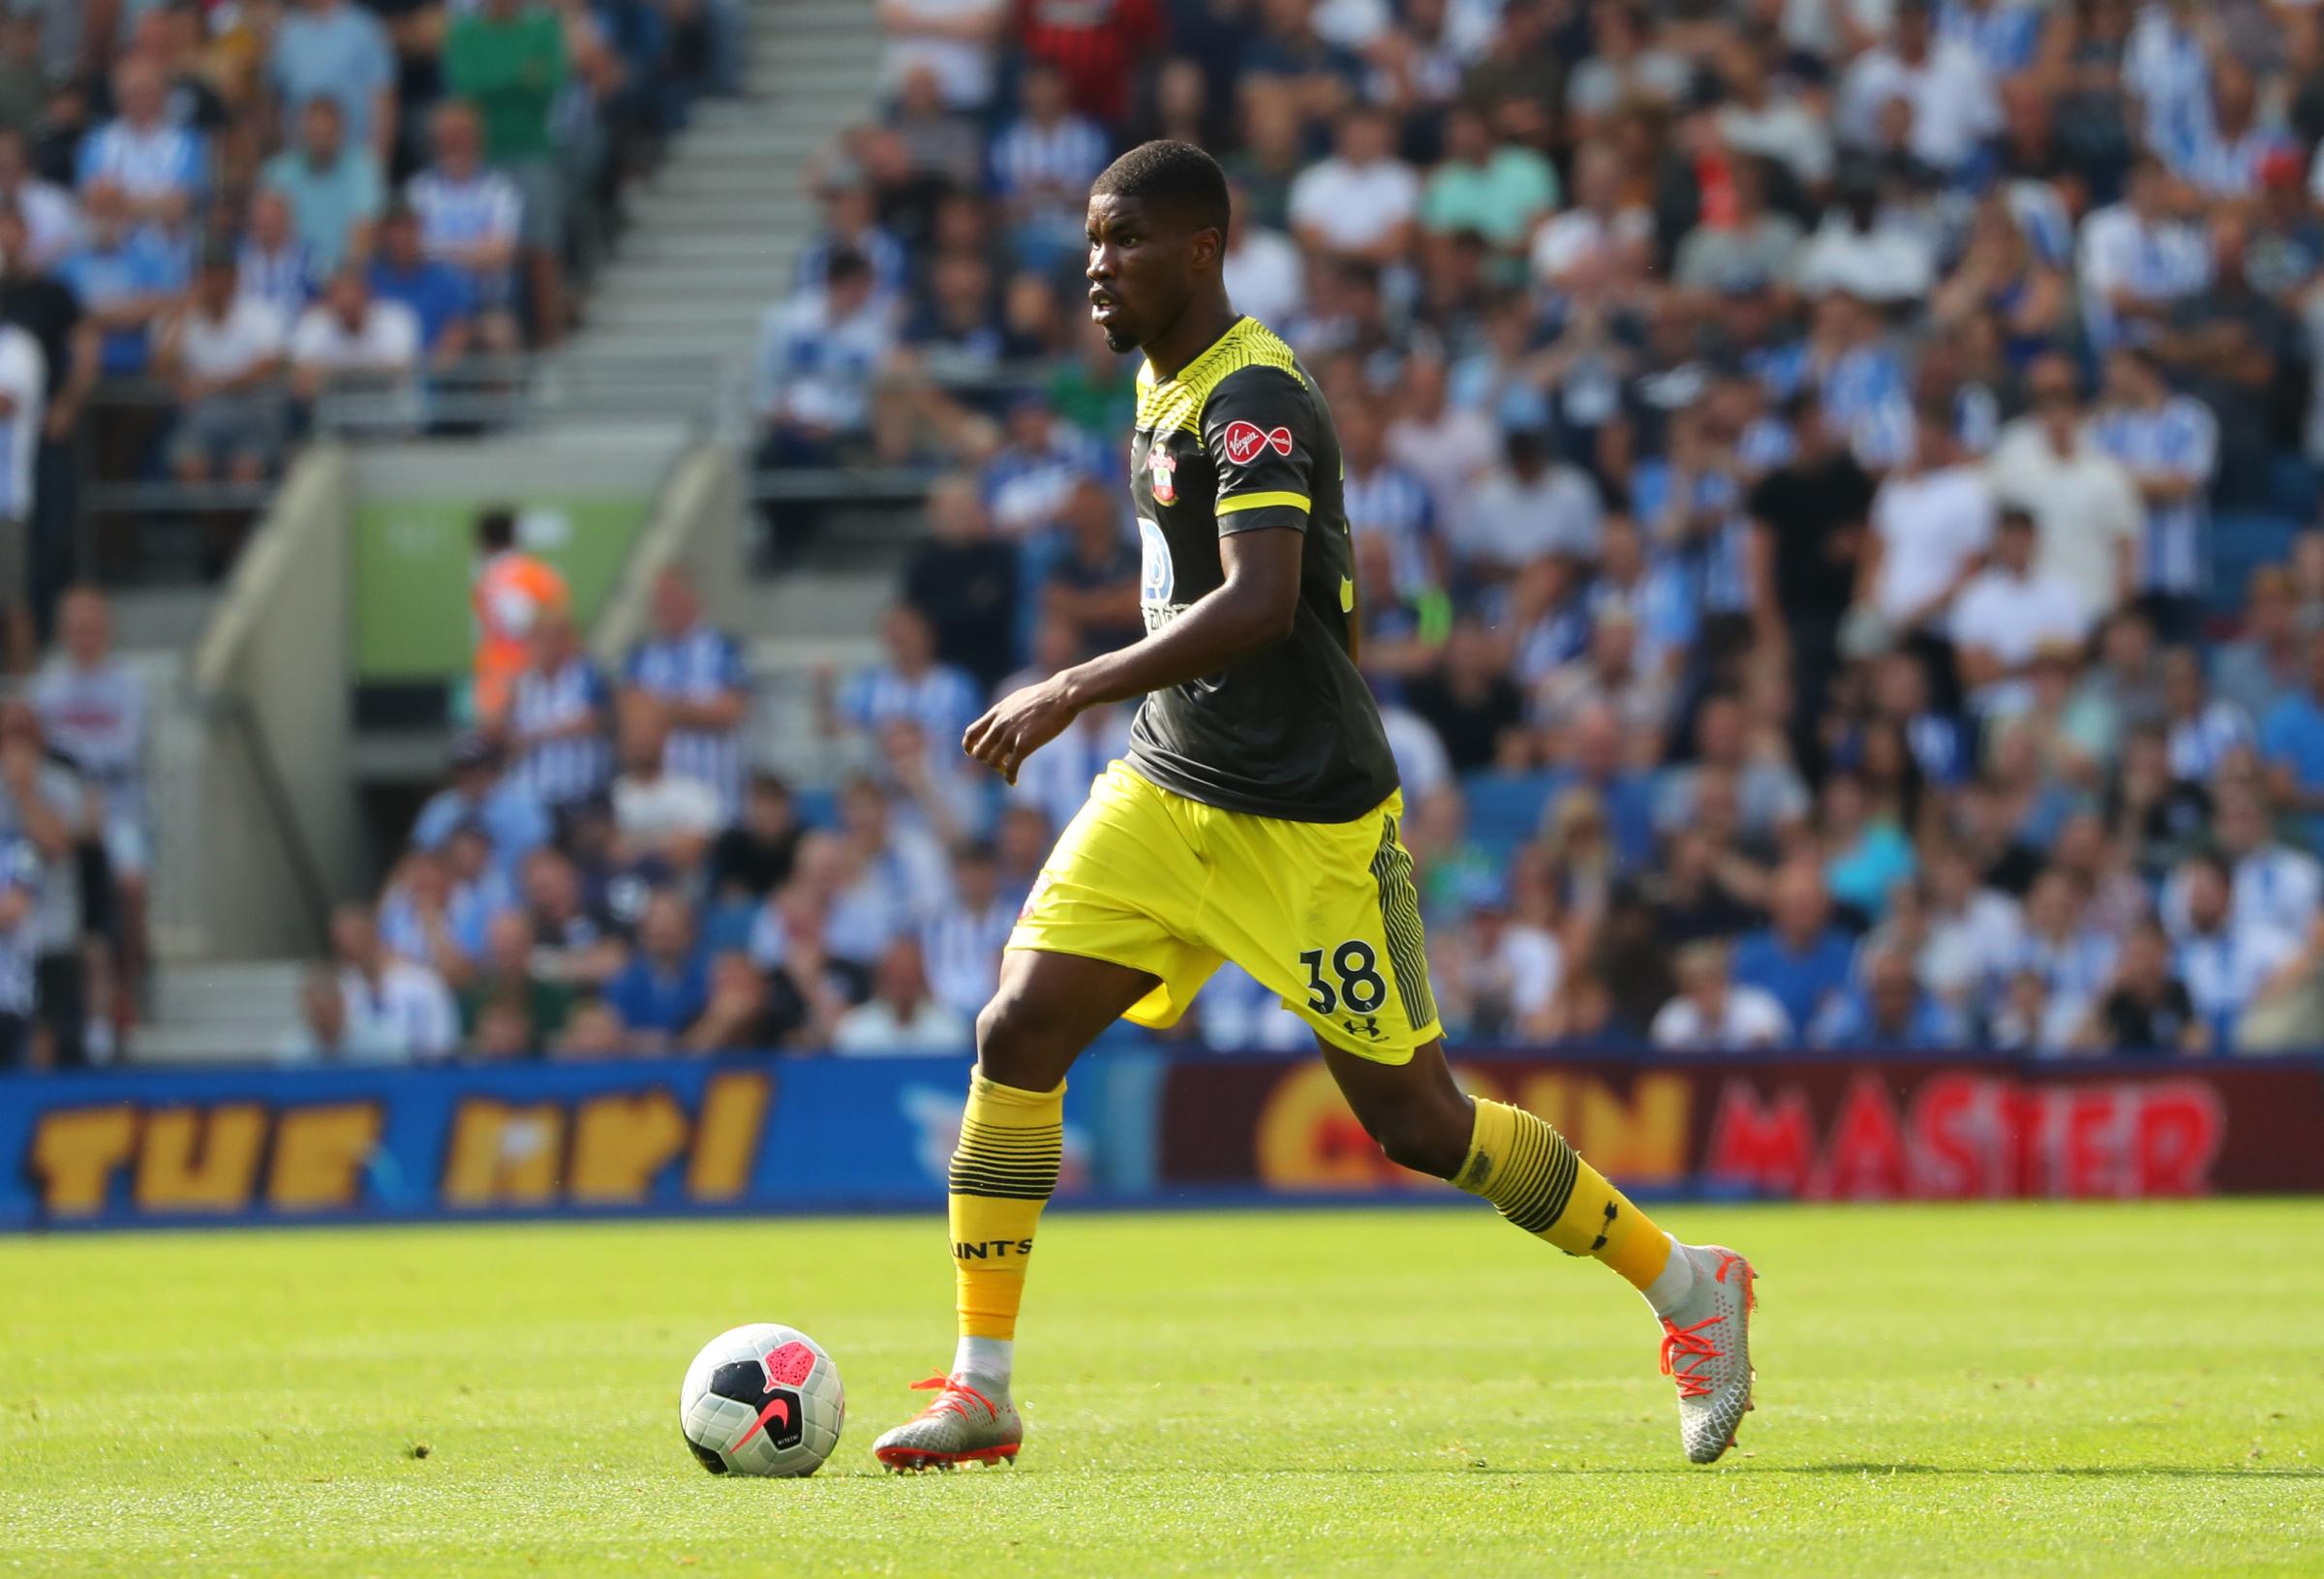 Kevin Danso opens up on his start to life at Southampton